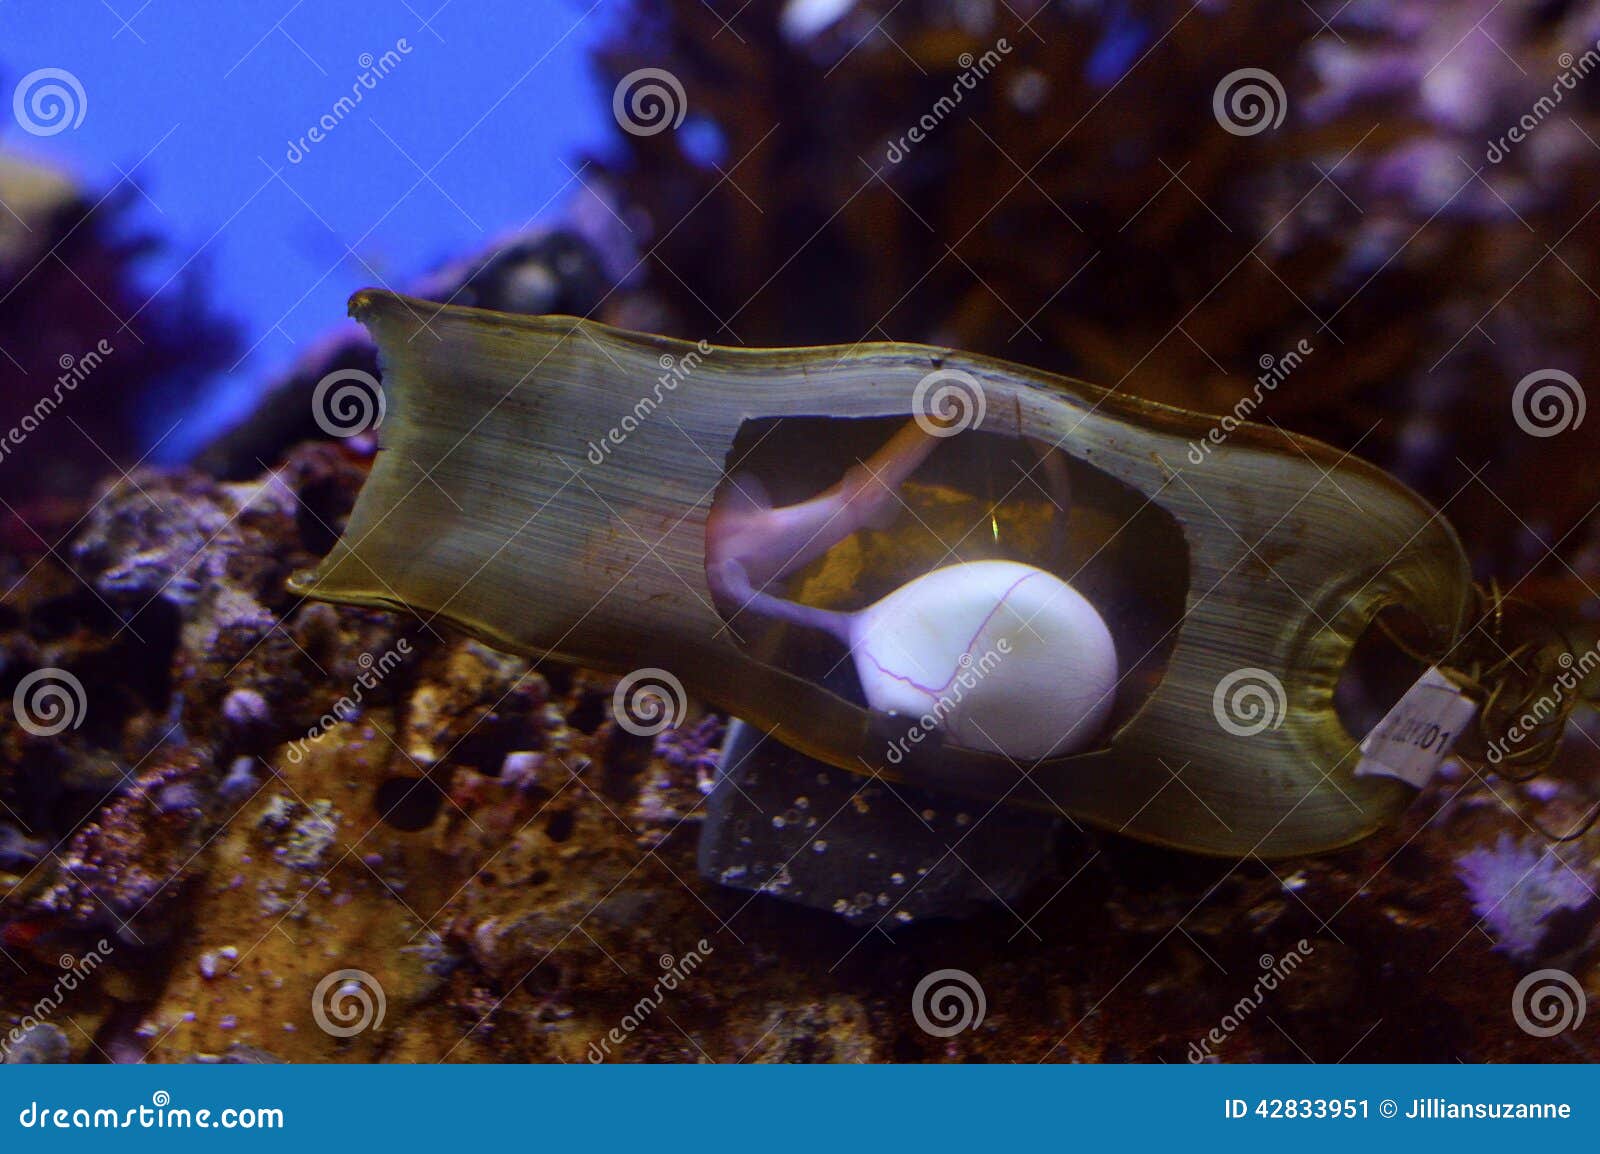 Shark egg case, hatched, hatchling, birth, mermaids purse, sea, ocean,  beach combing by K. Caselli. Photo stock - StudioNow